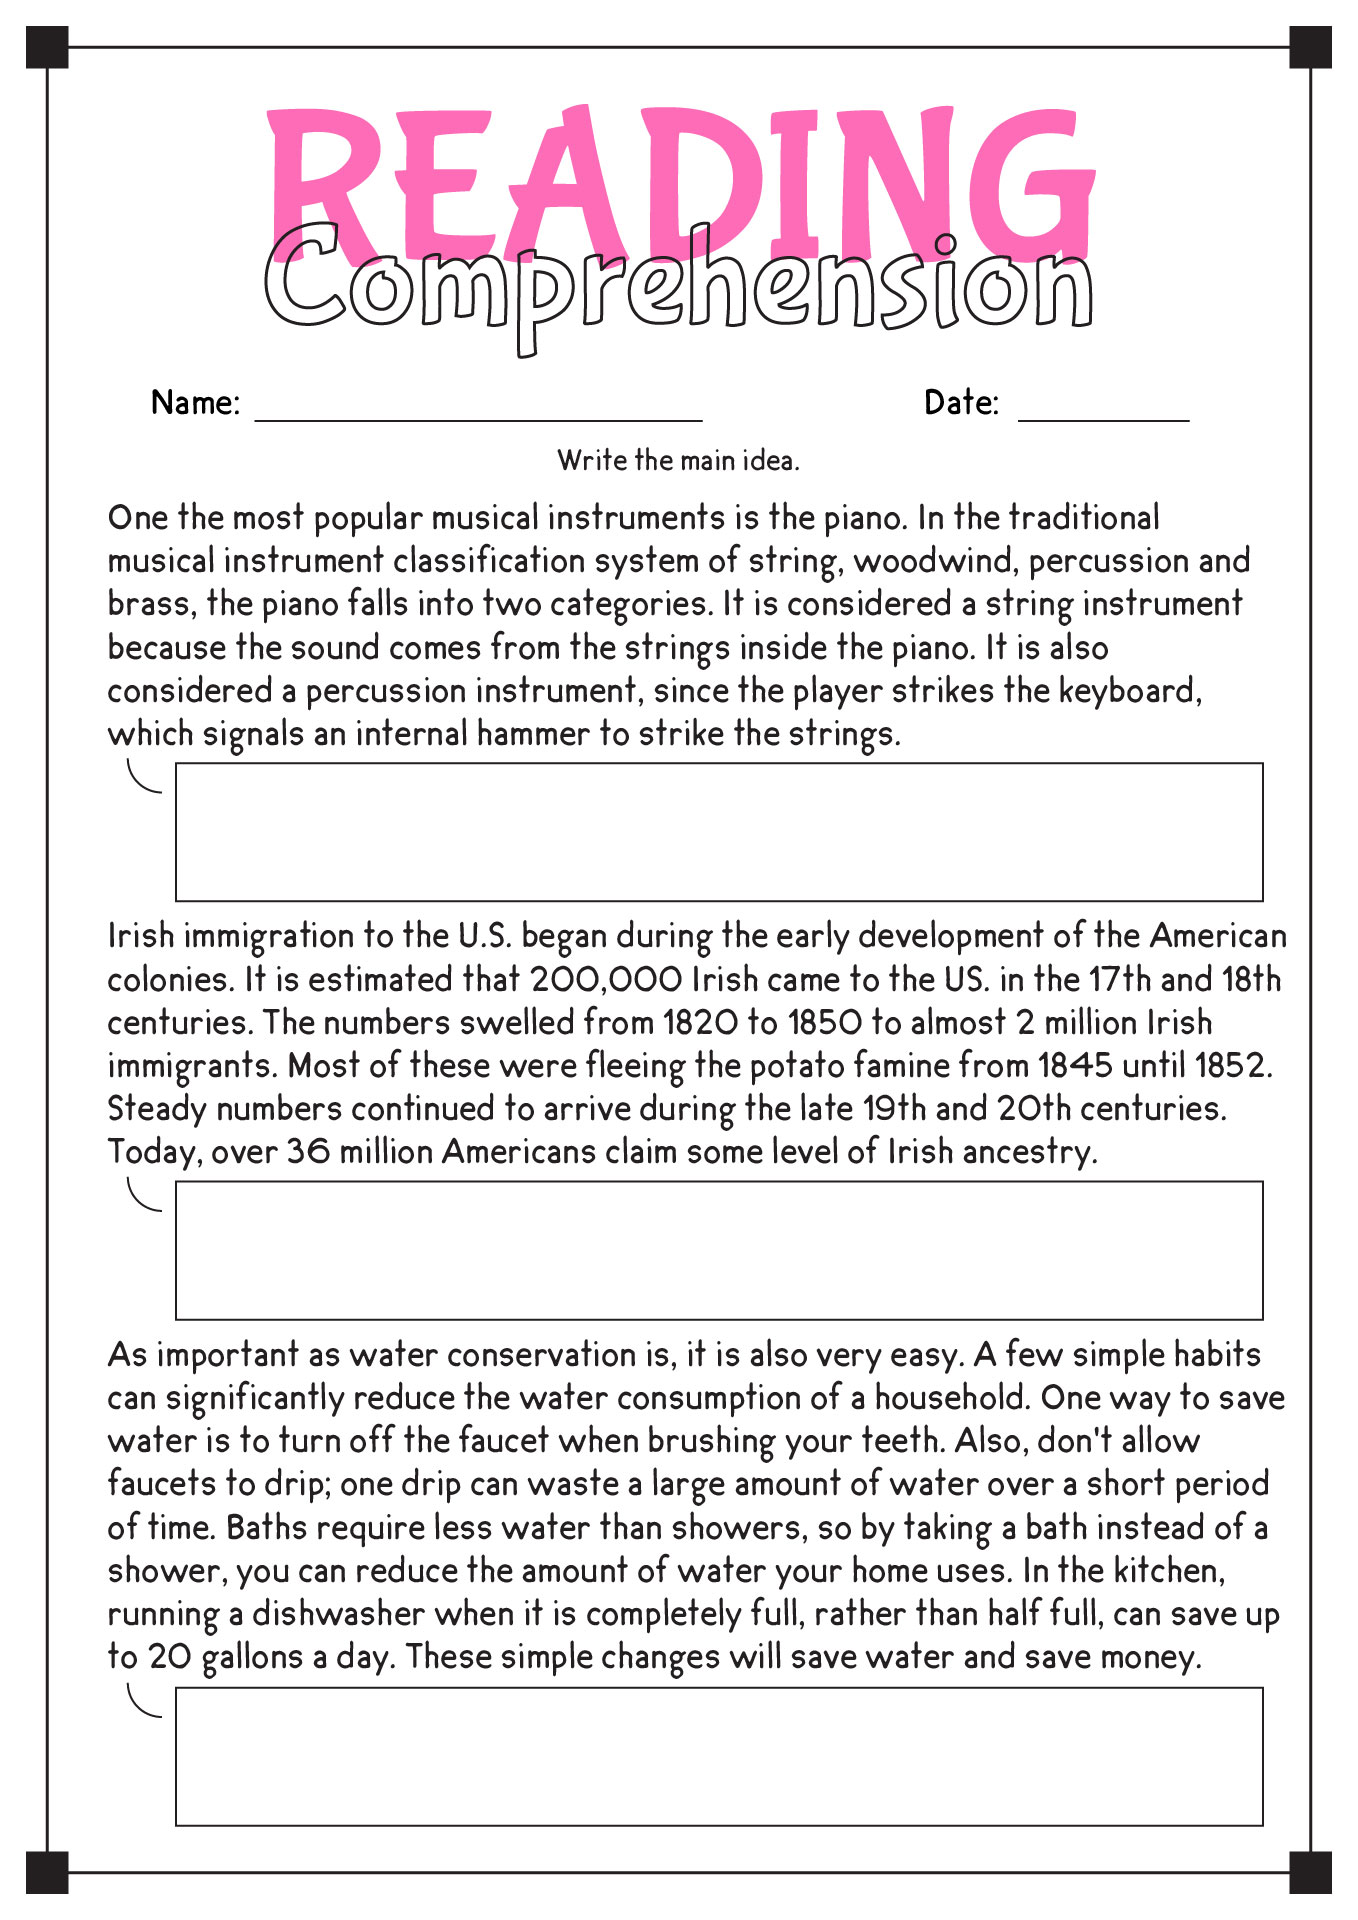 Free Reading Comprehension Worksheets High School